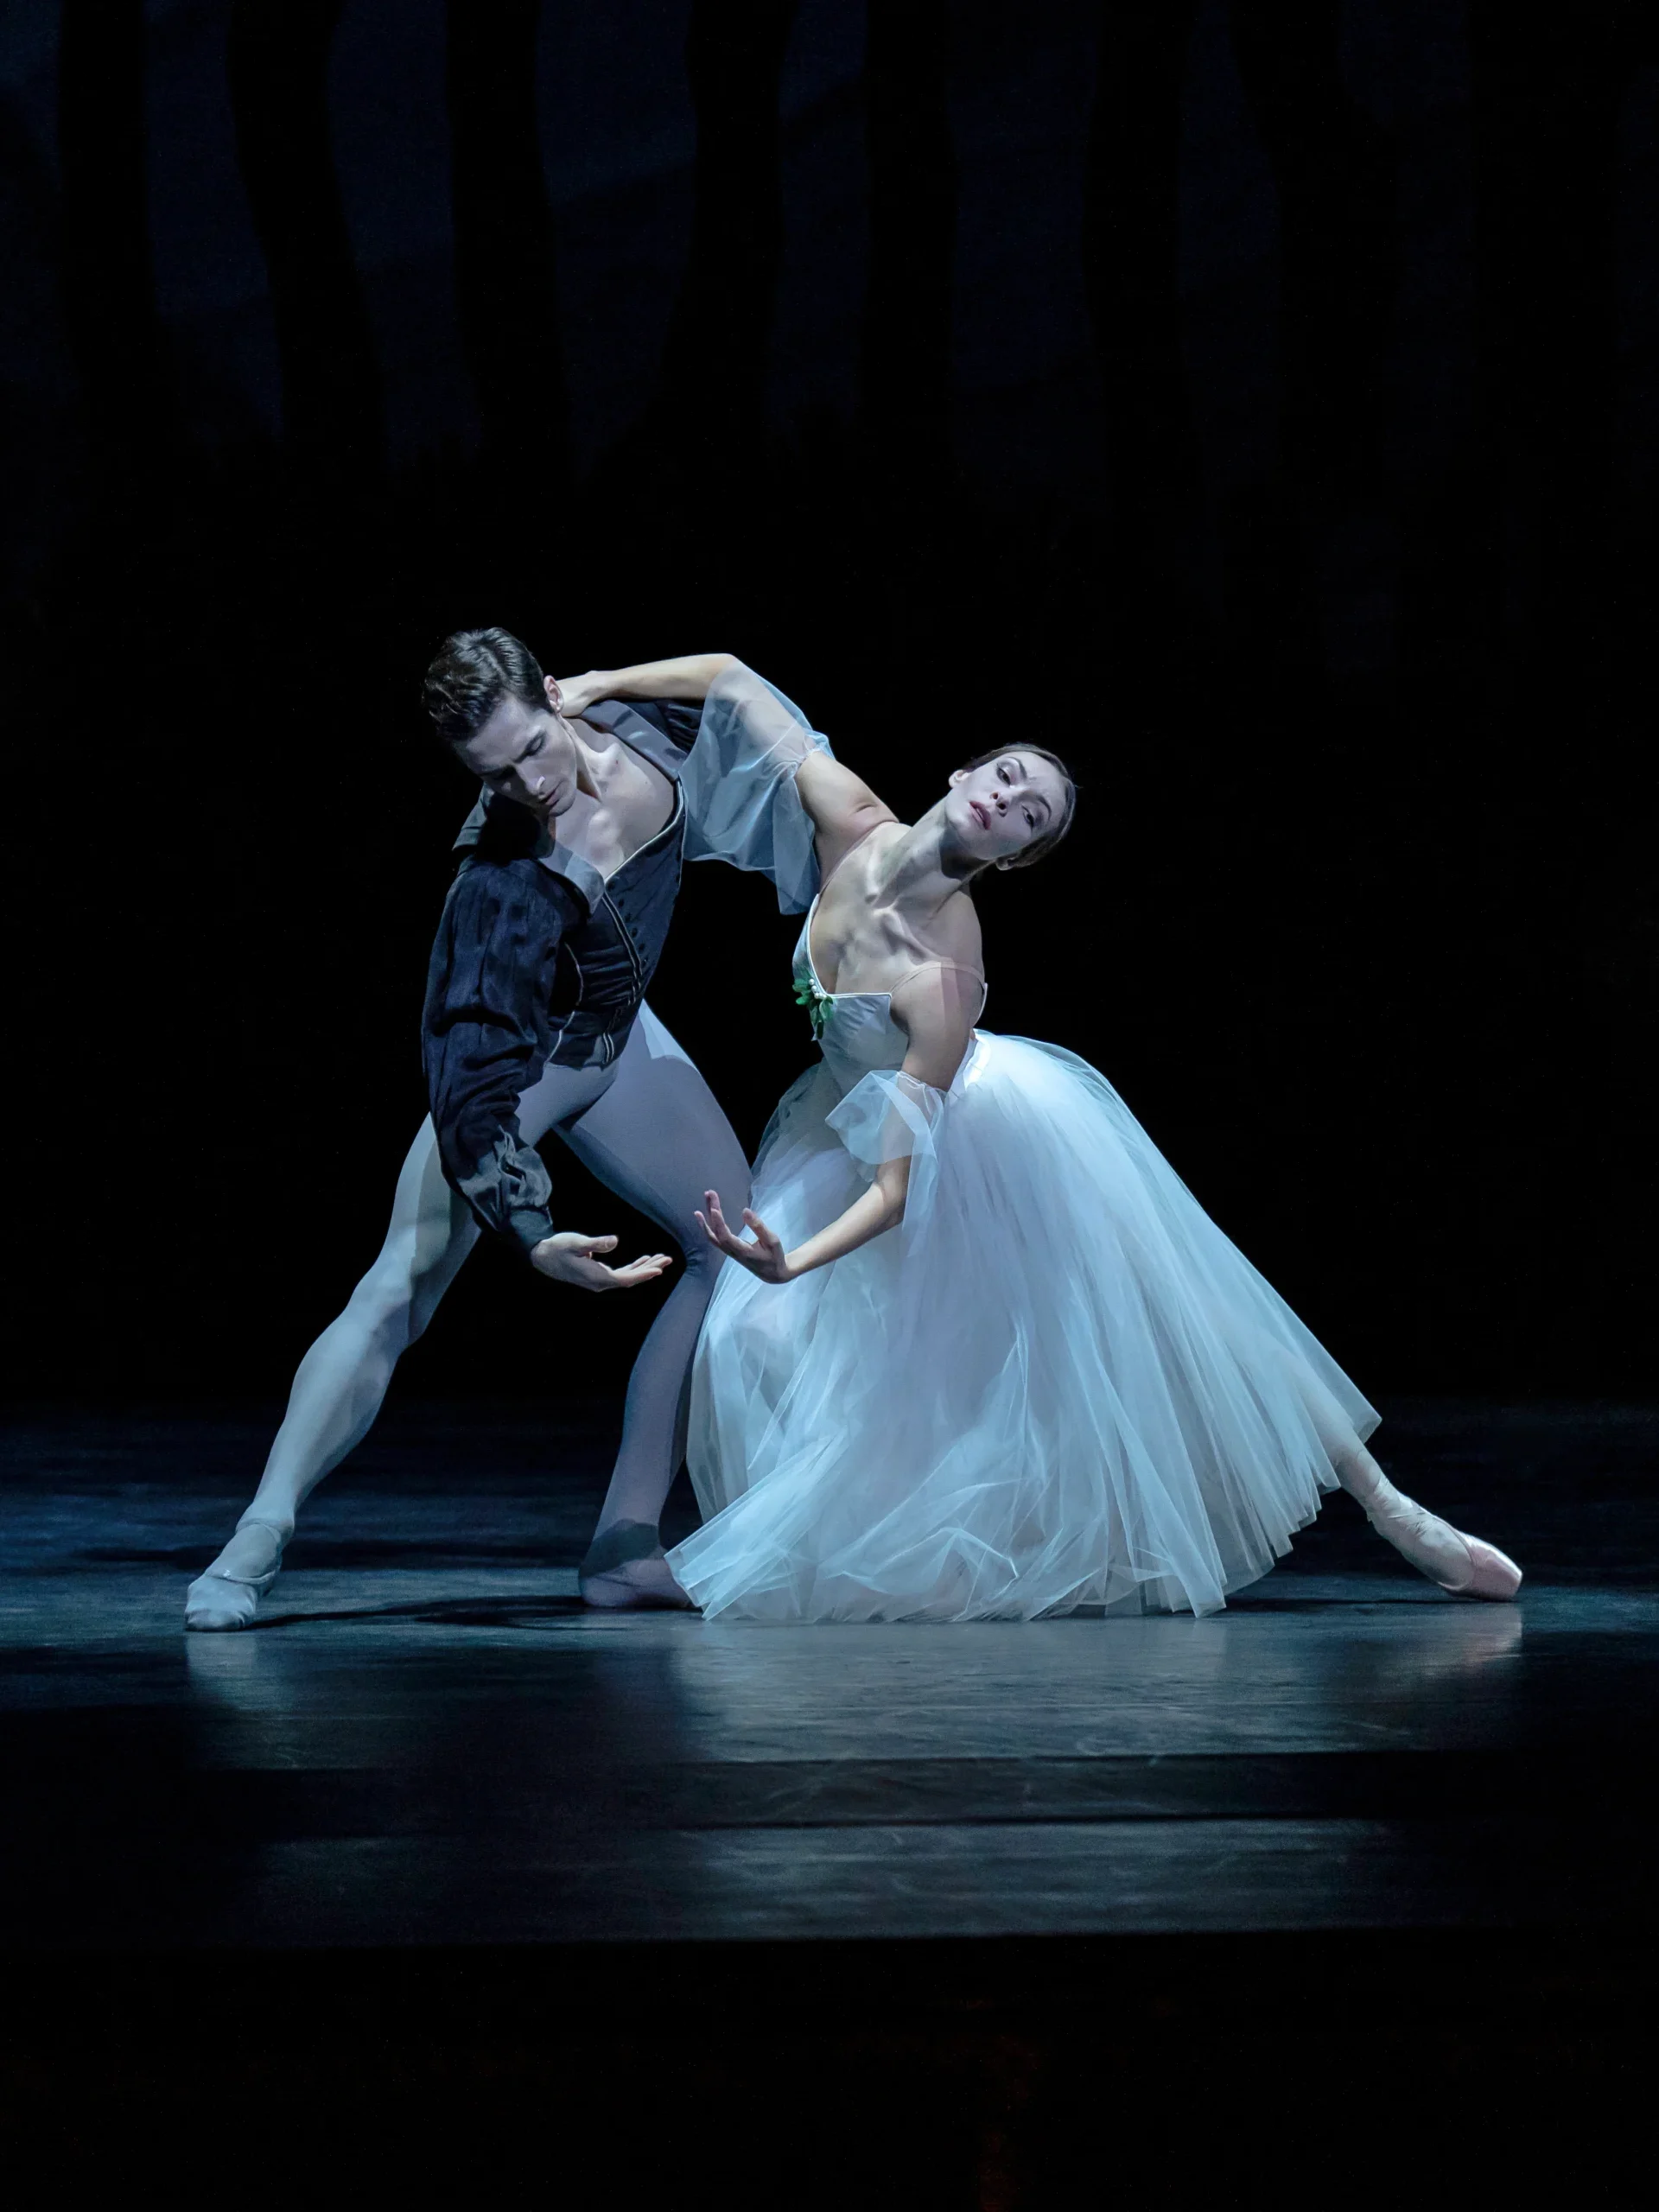 Jacopo Tissi and Olga Smirnova perform as Albrecht and Giselle, embracing each other lightly in a gentle pas de deux.